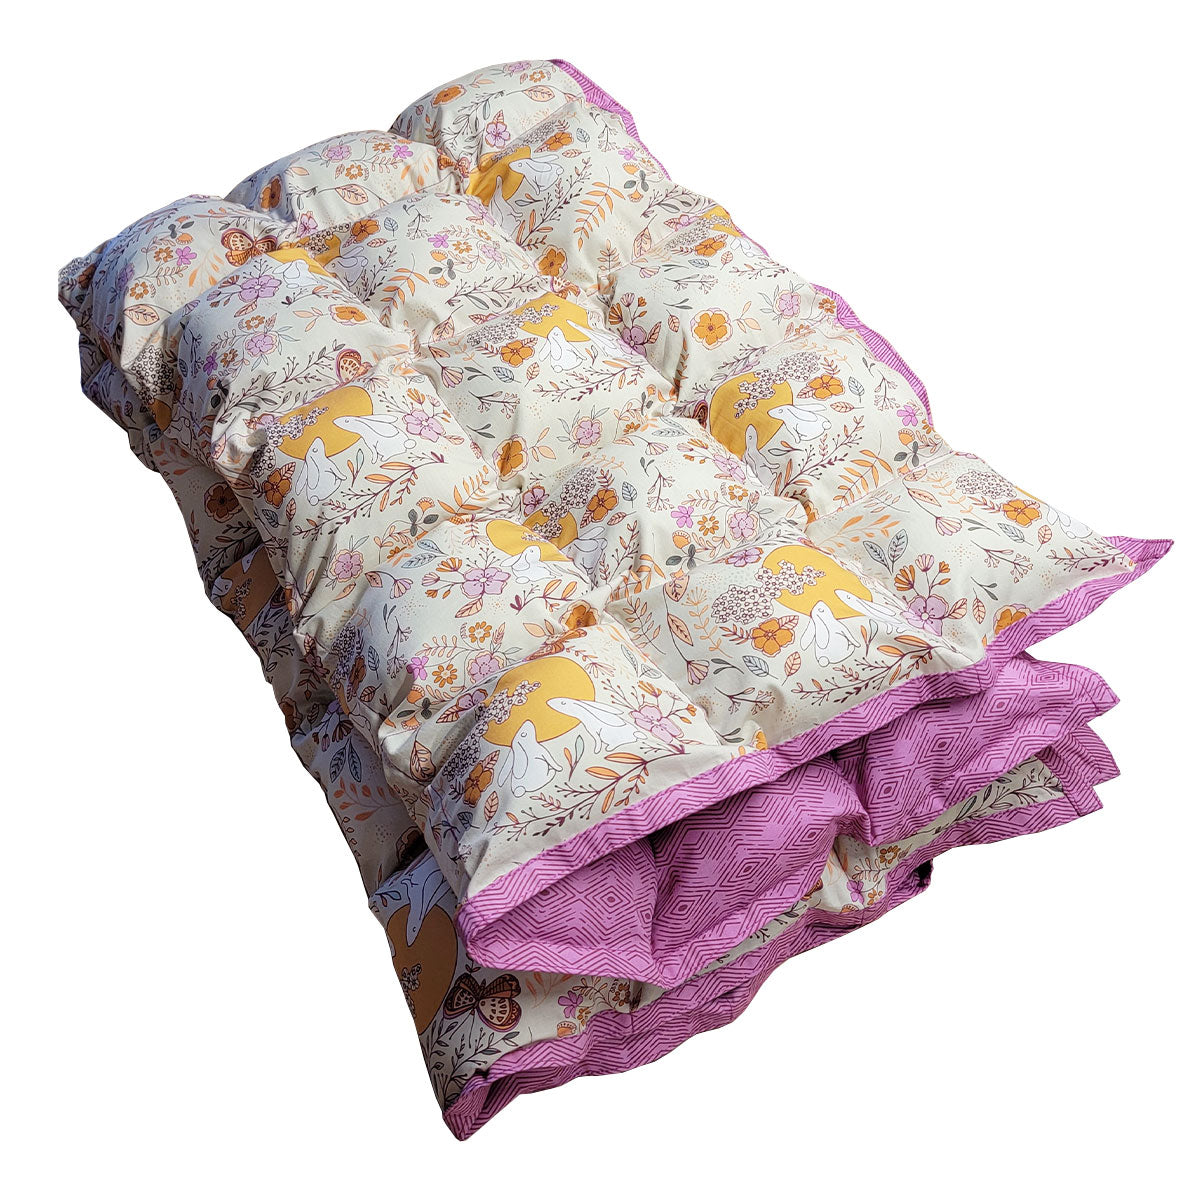 Custom Weighted Blanket - Moon Stories Mauve